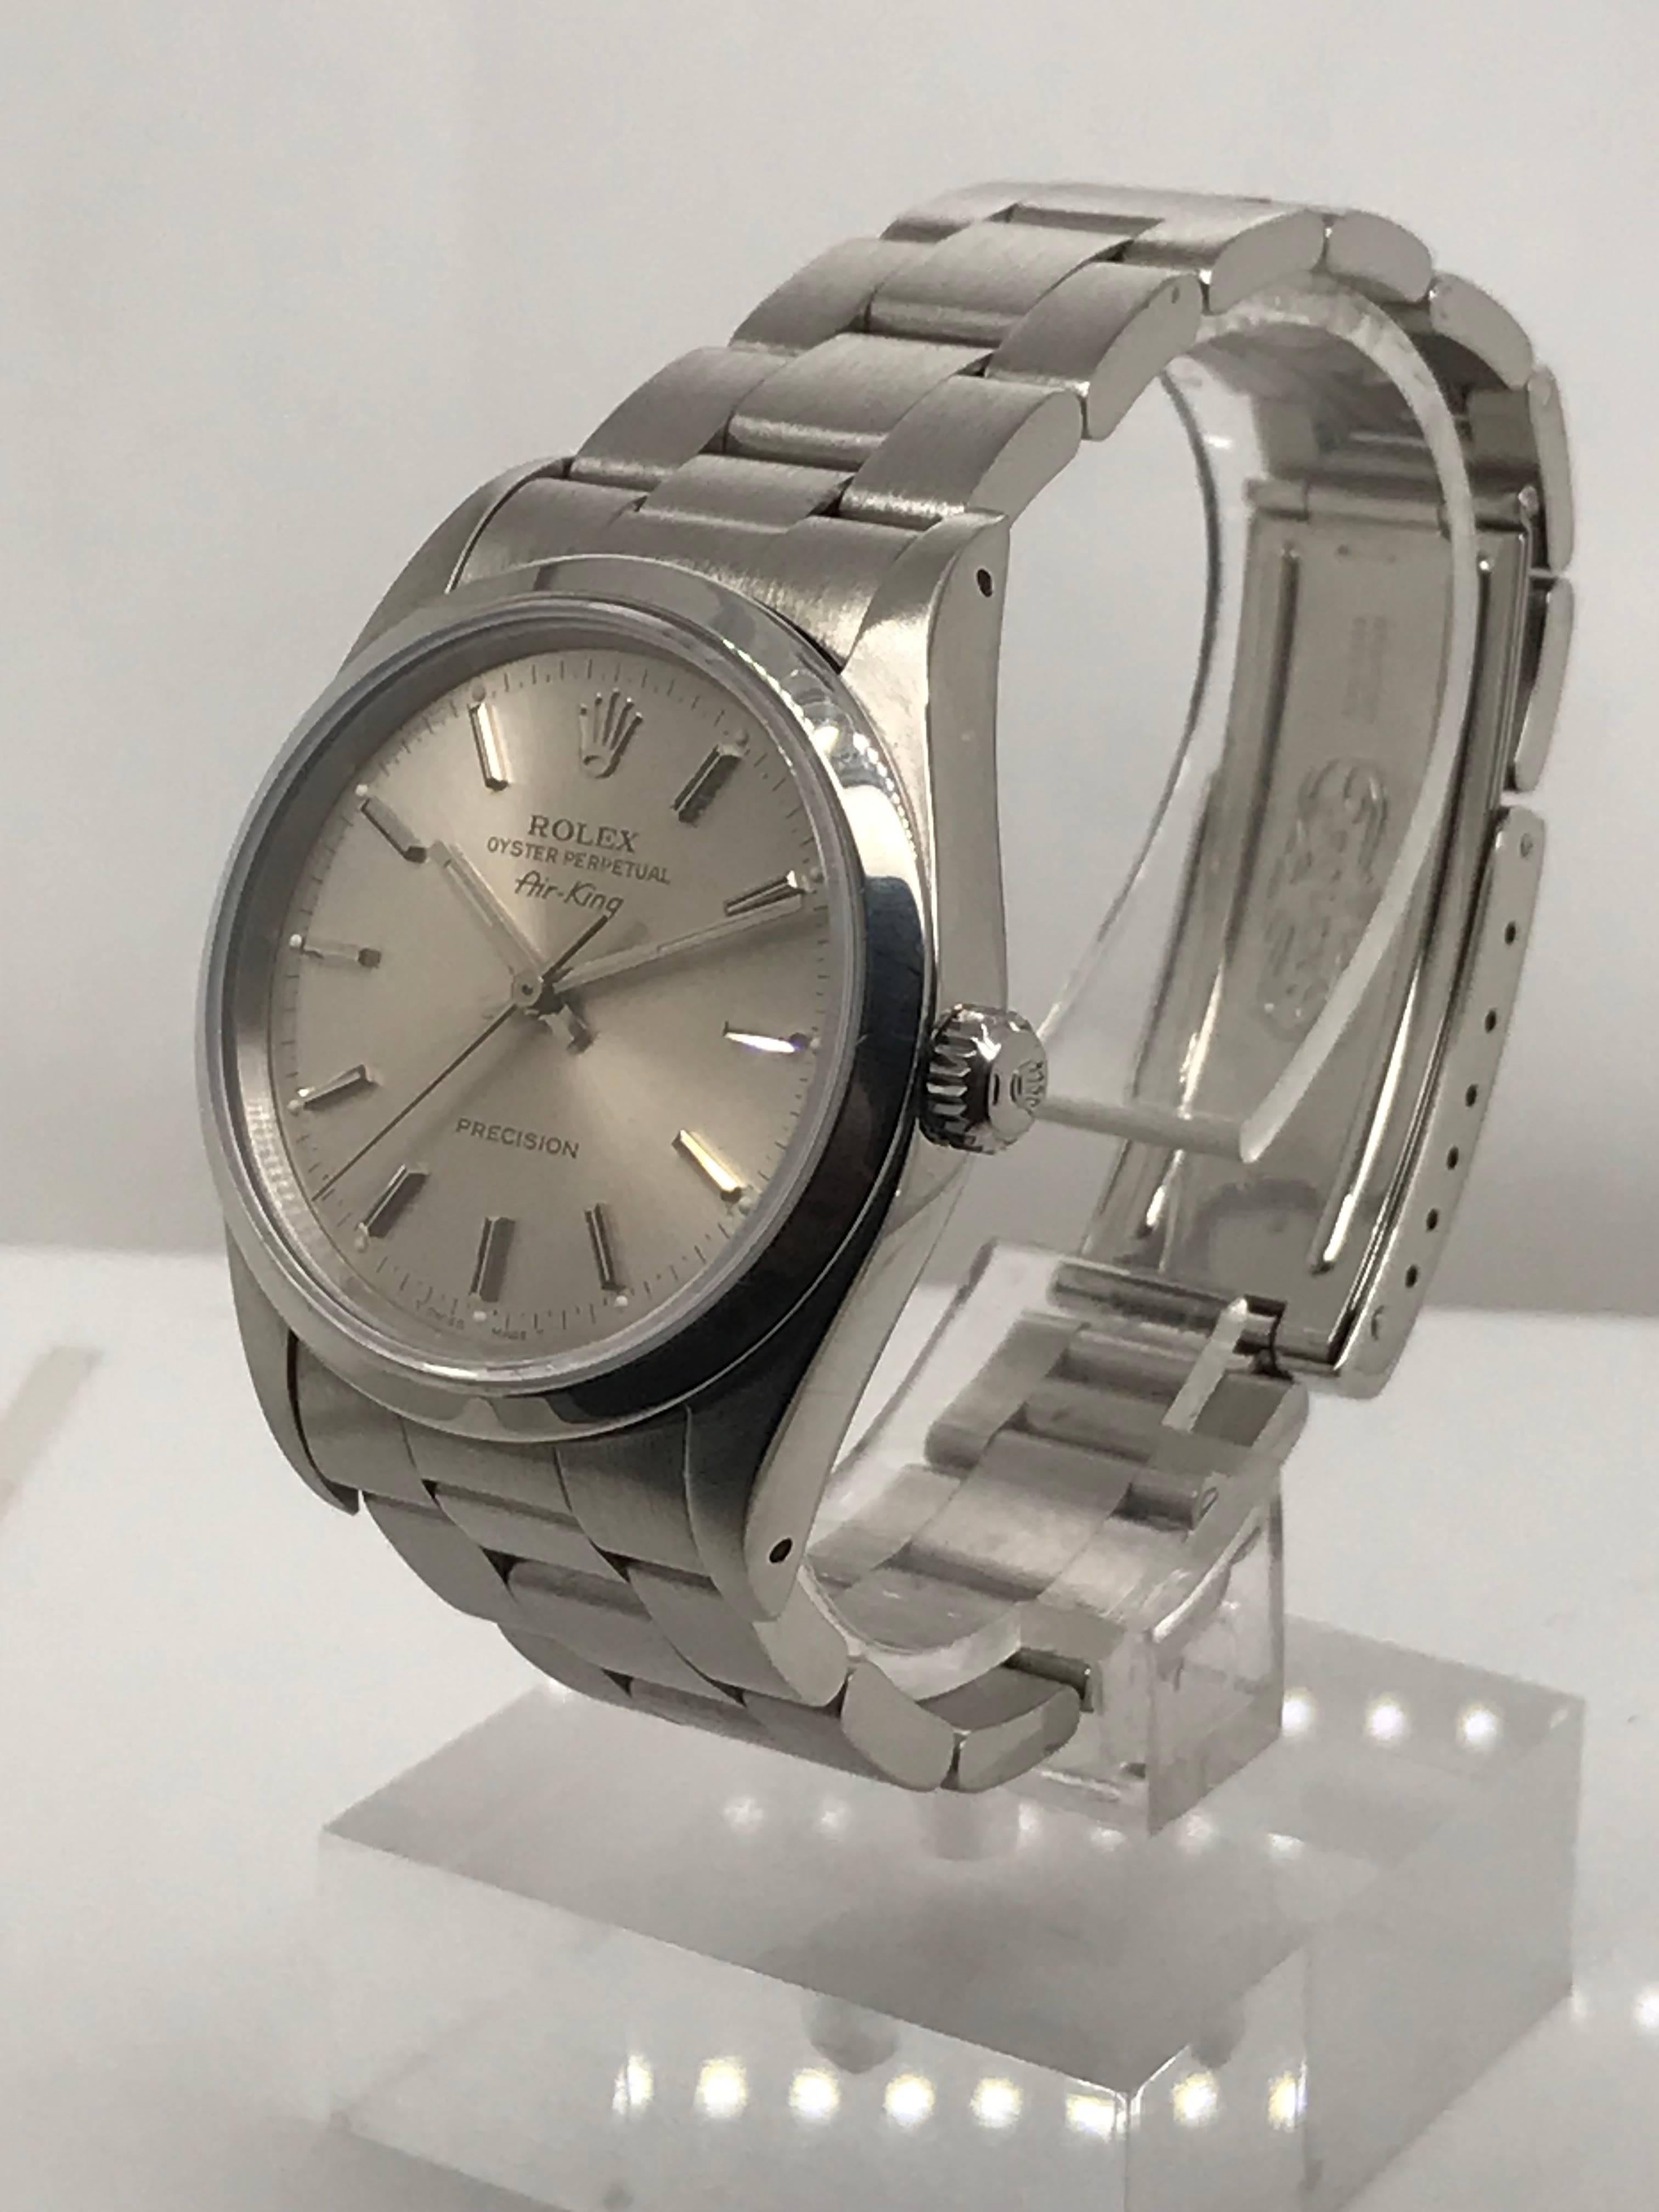 Excellent condition 1990 Rolex Air King with a silver colored dial and all Stainless Steel Casing. This watch is on a Stainless Steel Oyster link bracelet.

This timepiece was recently serviced by a Rolex certified Watchmaker. 